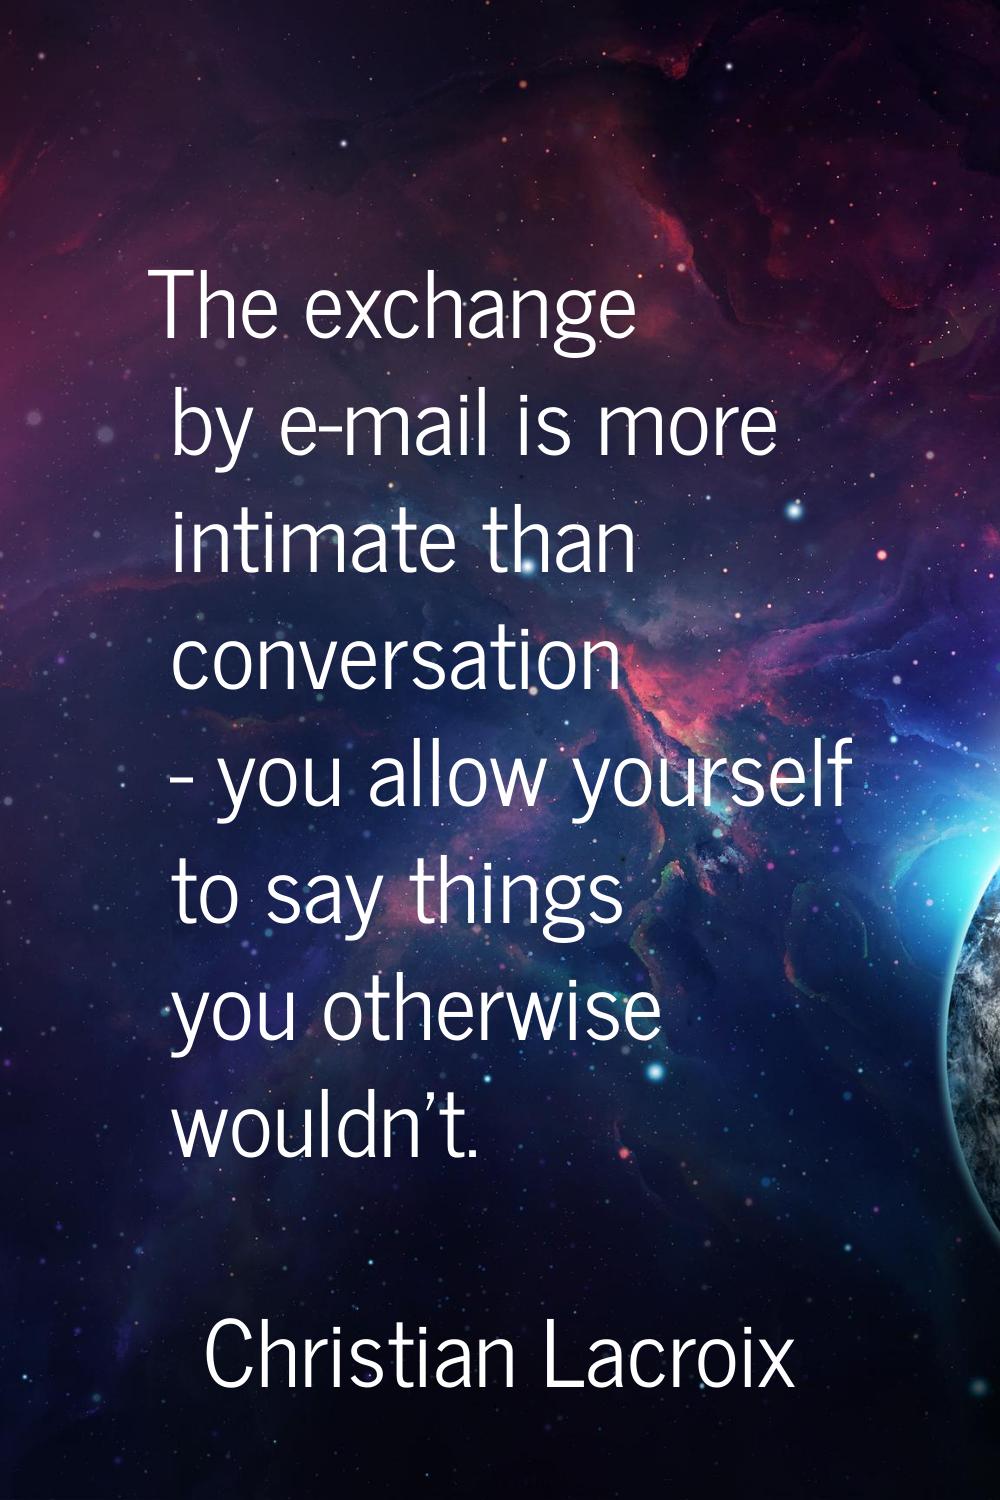 The exchange by e-mail is more intimate than conversation - you allow yourself to say things you ot